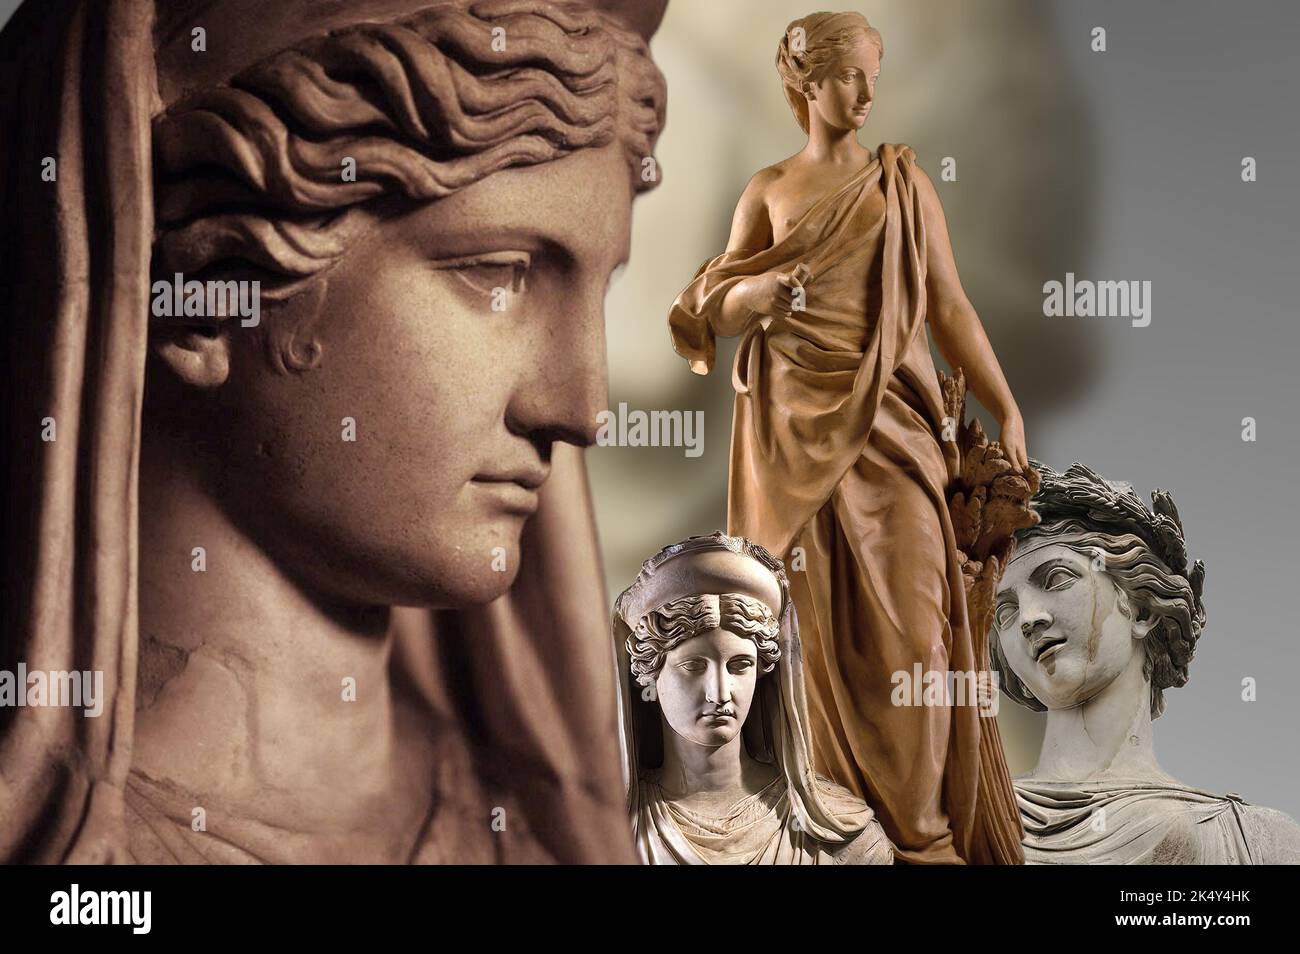 Depiction of authentic statues of ancient Rome of Ceres (Demeter) the goddess of agriculture and fertility Stock Photo